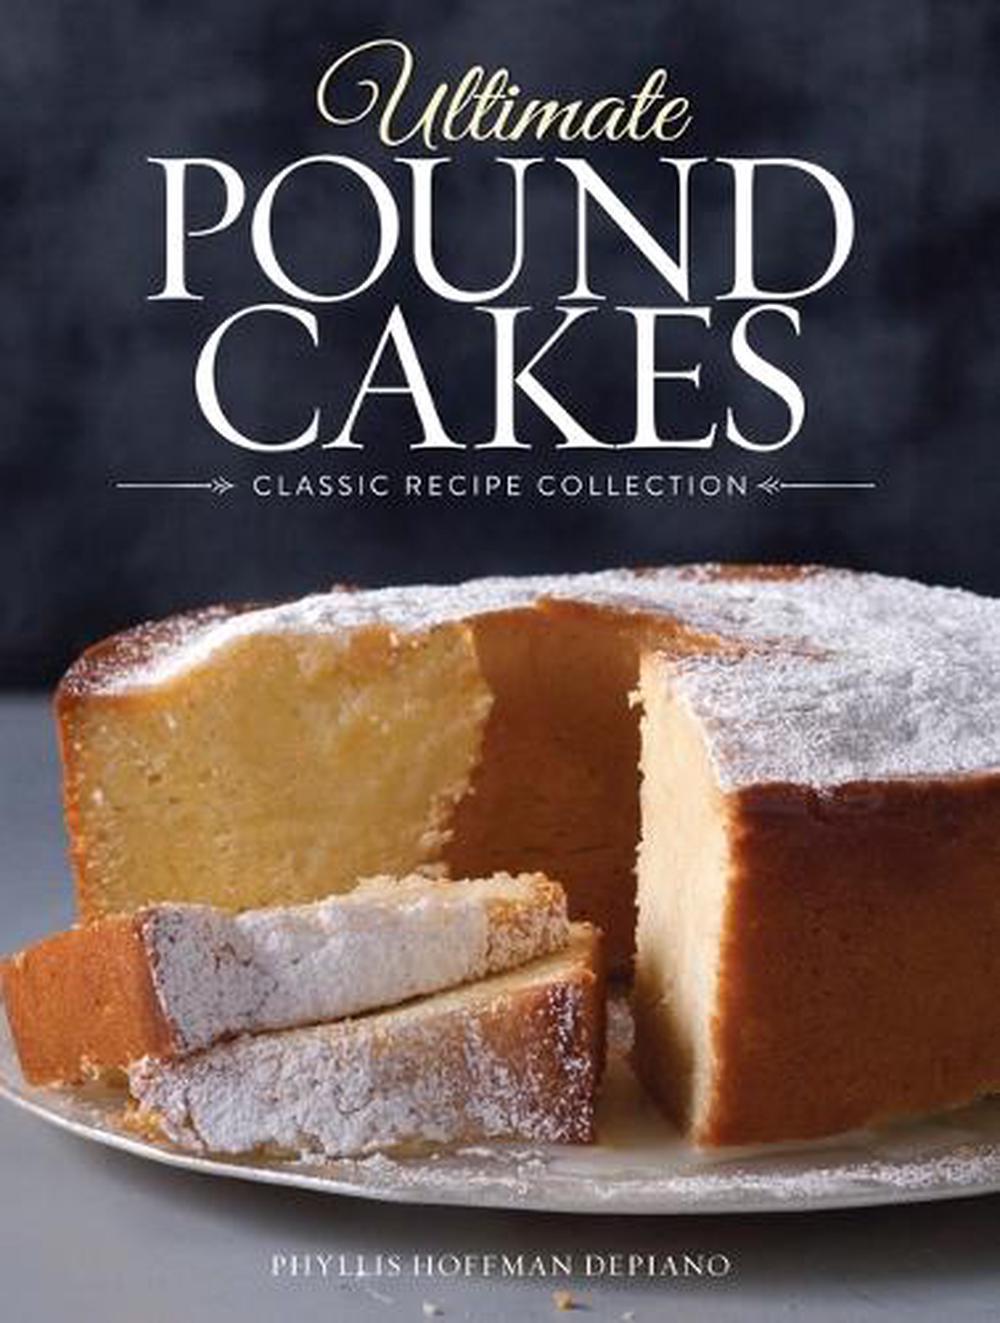 Ultimate Pound Cakes Classic Recipe Collection (English) Hardcover